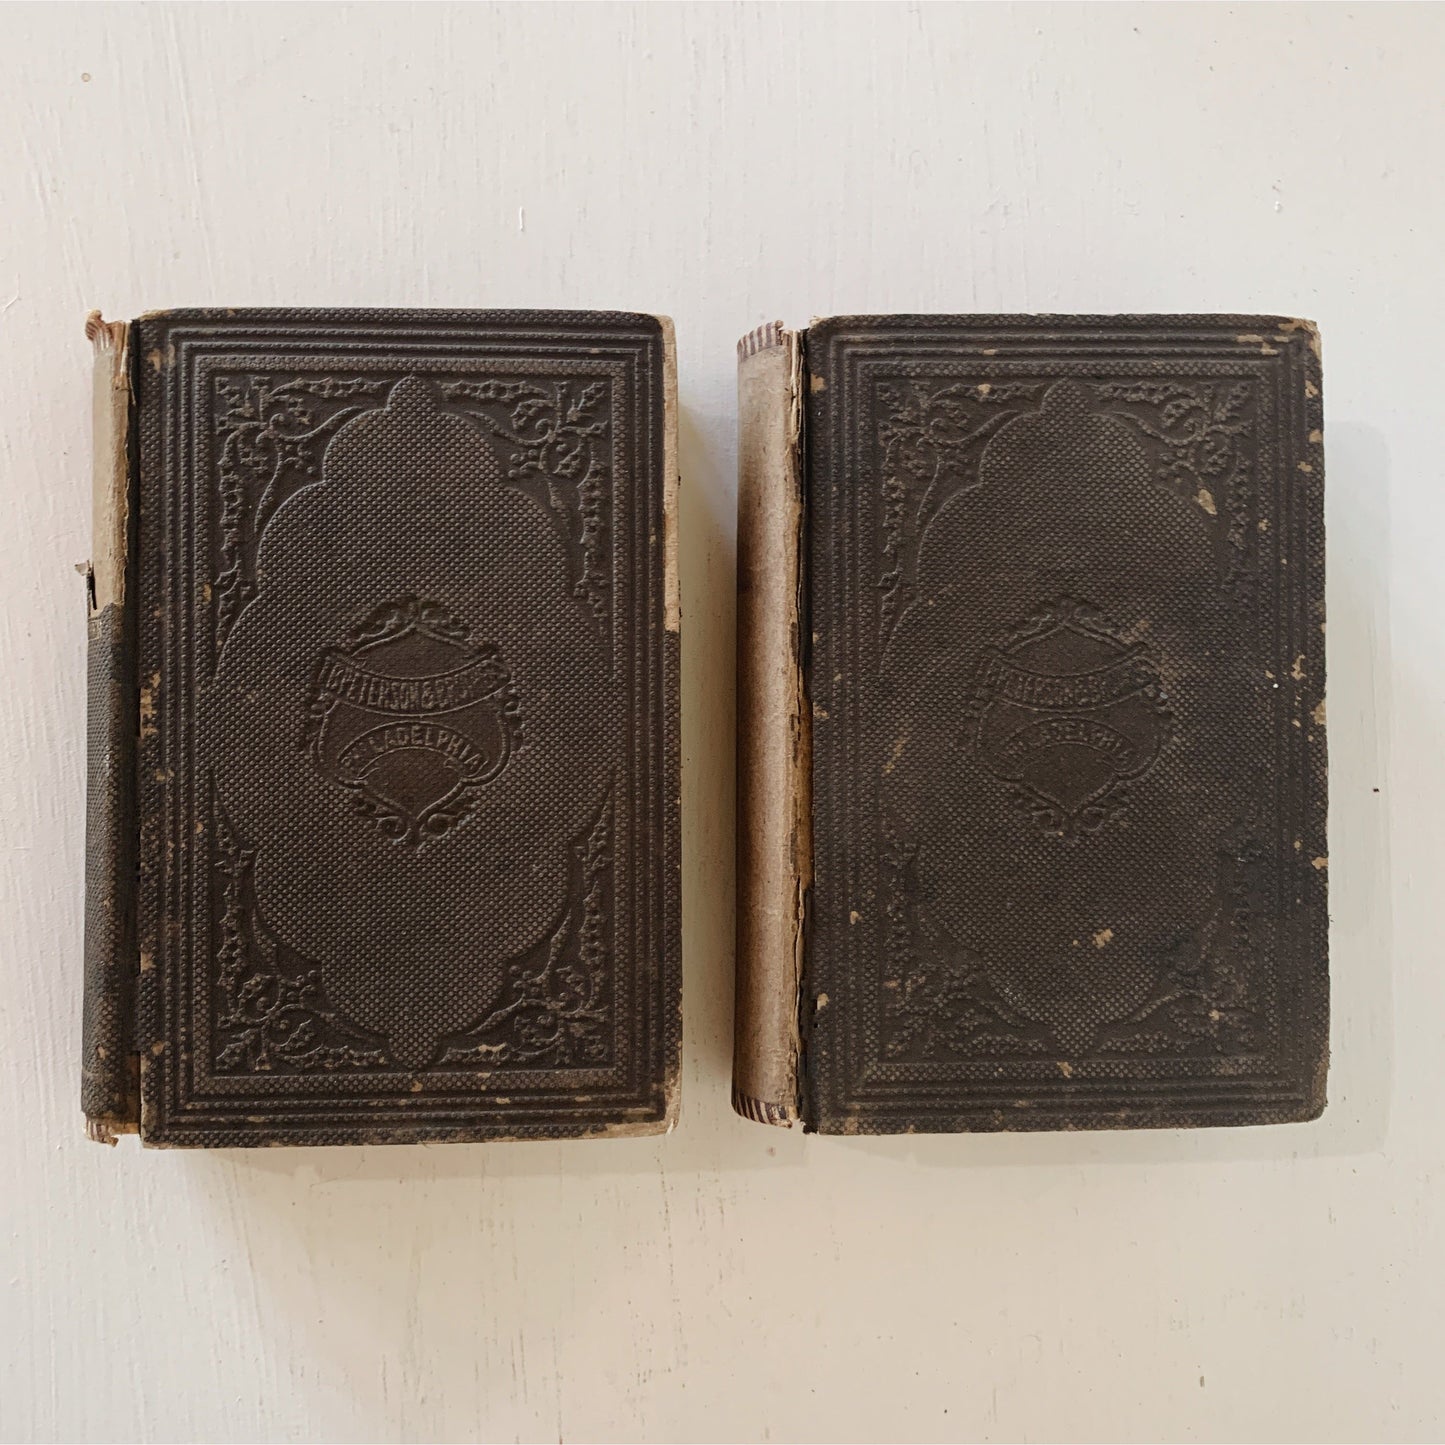 Life in the Old World, Two Volumes, 1860, Frederika Bremer